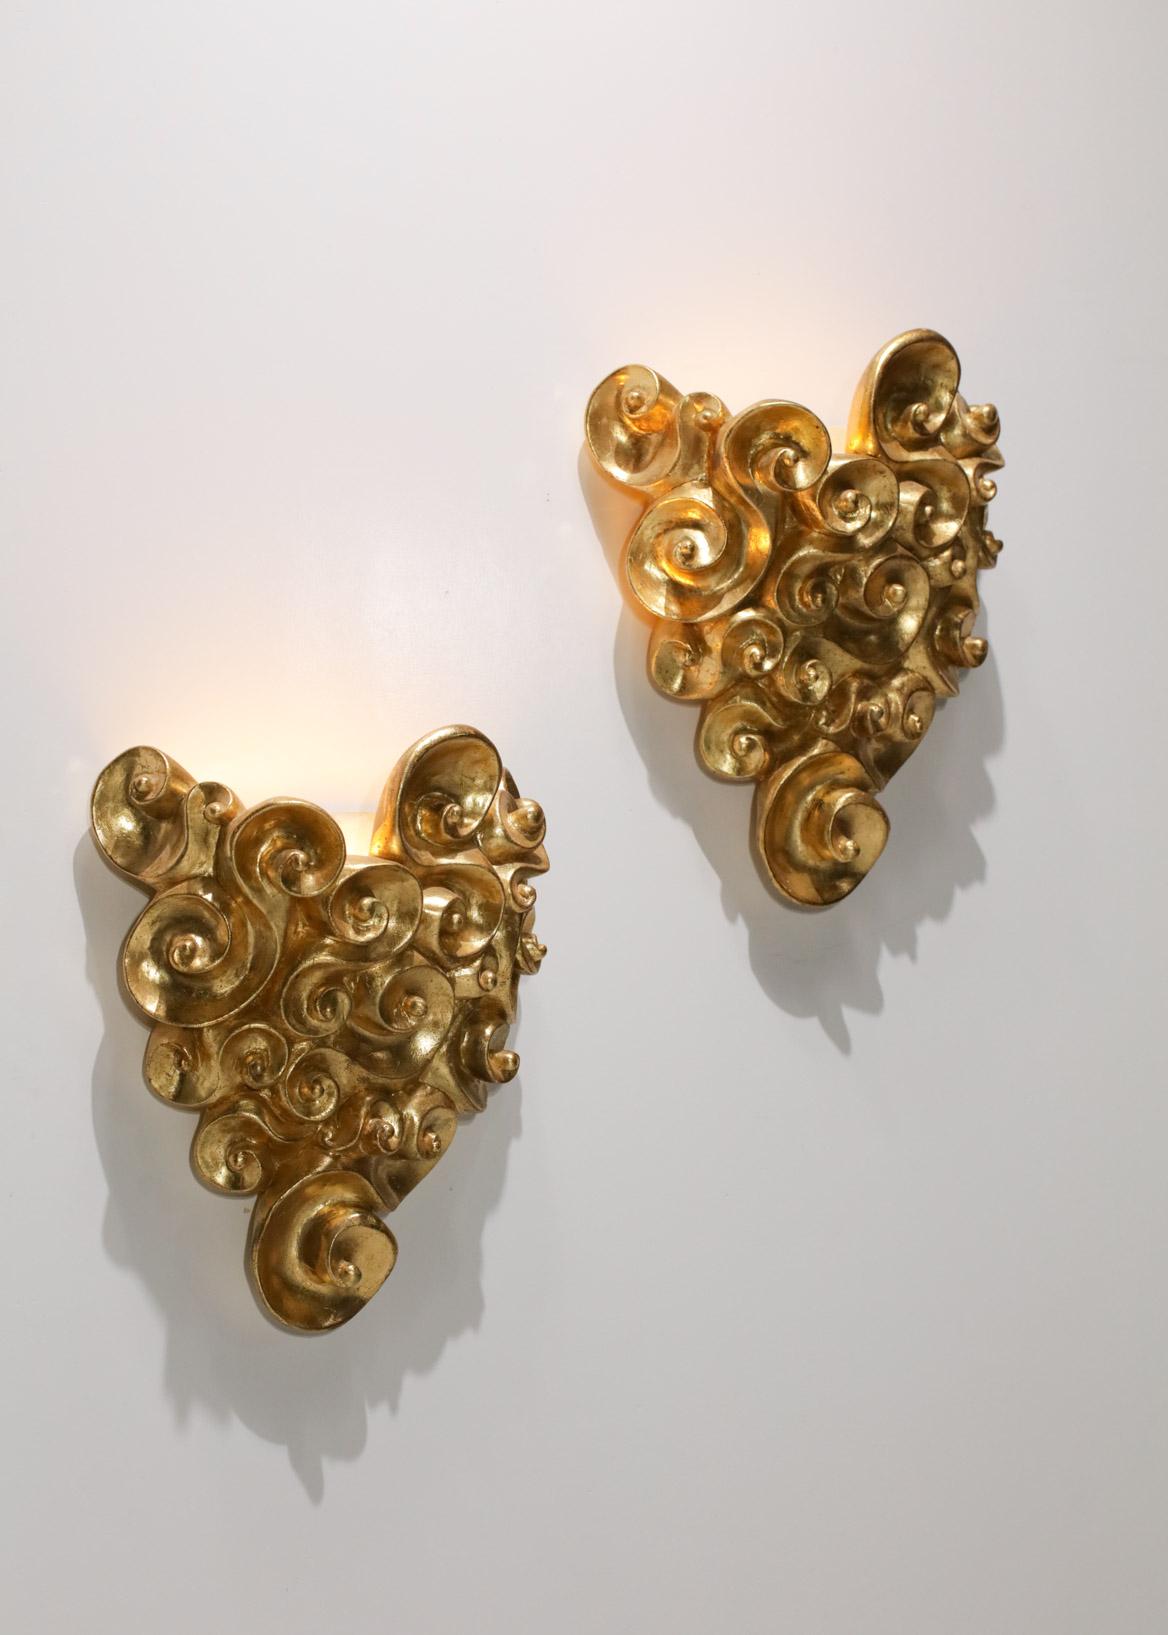 Baroque Pair of Jean Boggio Gilded Plaster Wall Lights for Les Héritiers